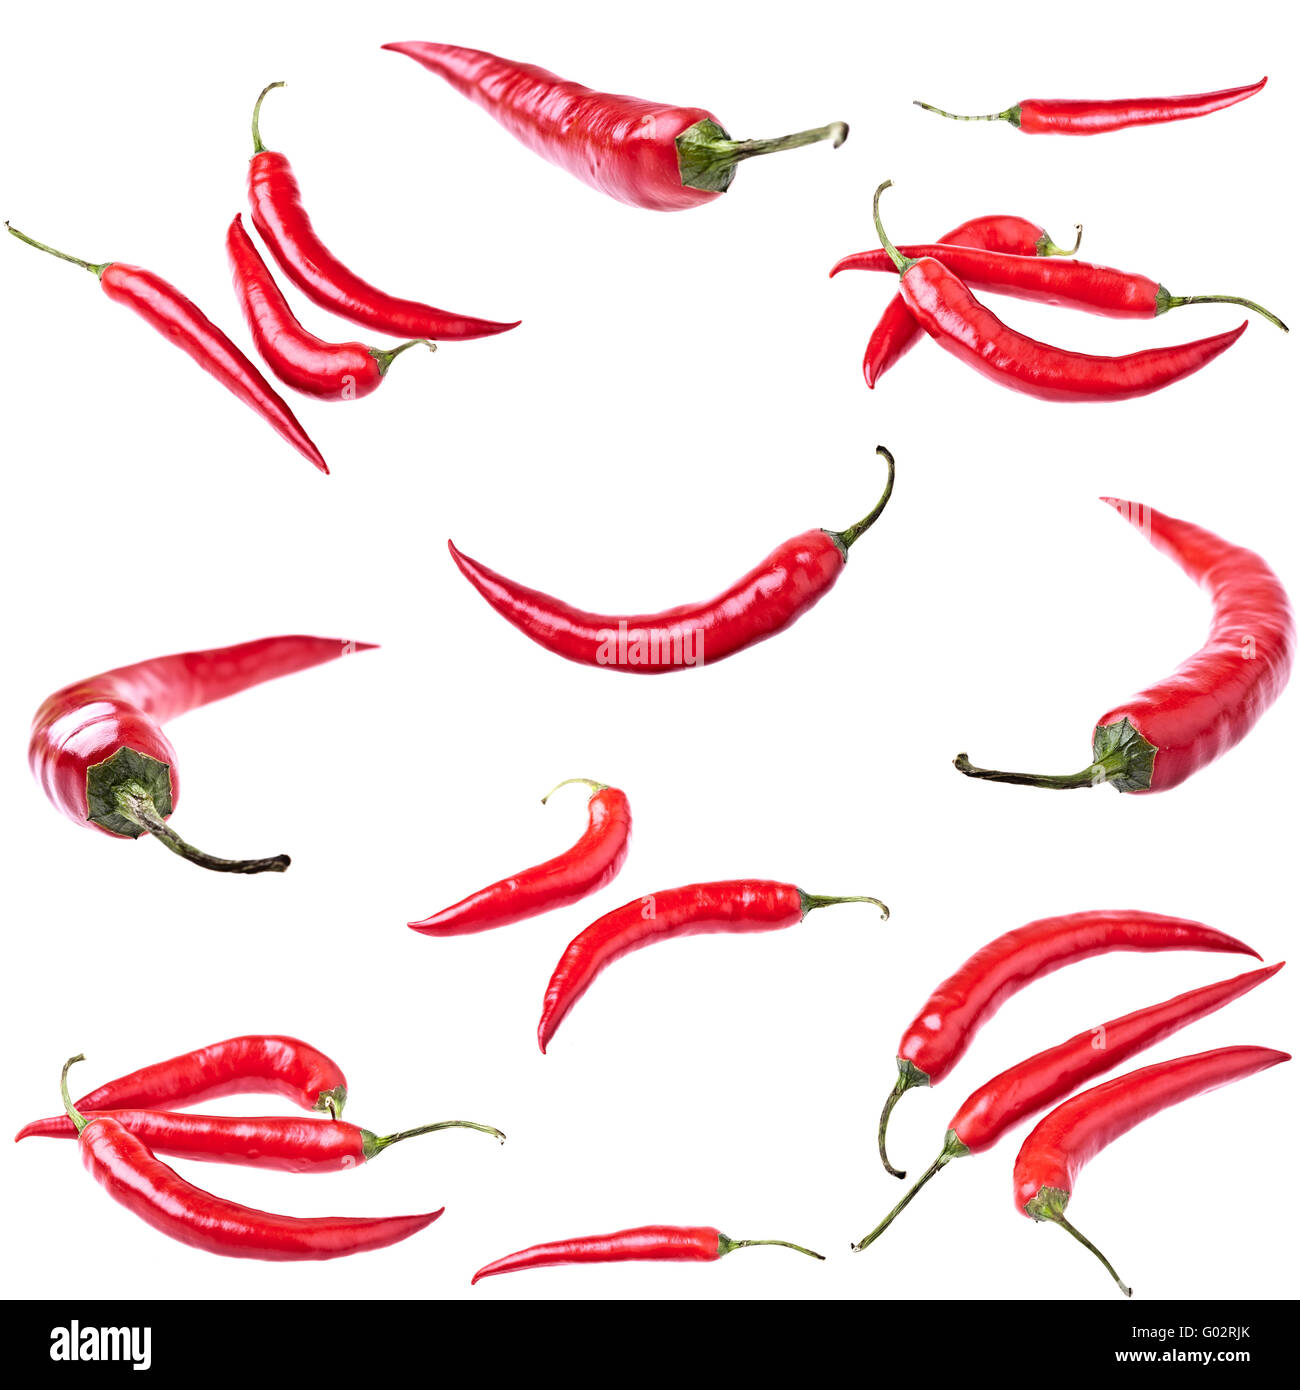 Red Hot Chili Peppers - isoliert Stockfoto